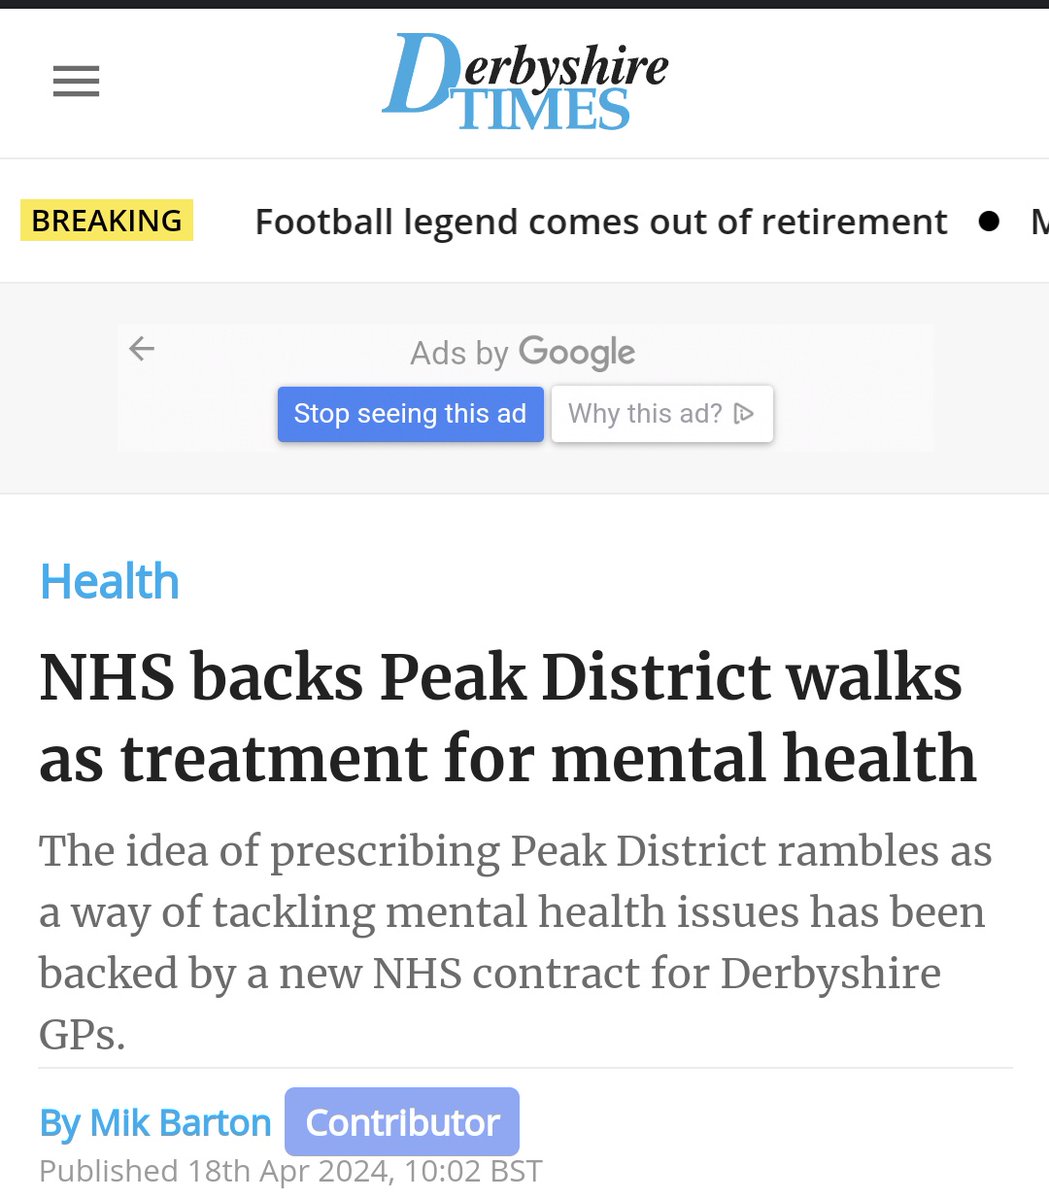 It's taken 4+ years to see a headline like this, but we're finally getting there! 
#NaturalHealthService @MindOMountains

derbyshiretimes.co.uk/health/nhs-bac…